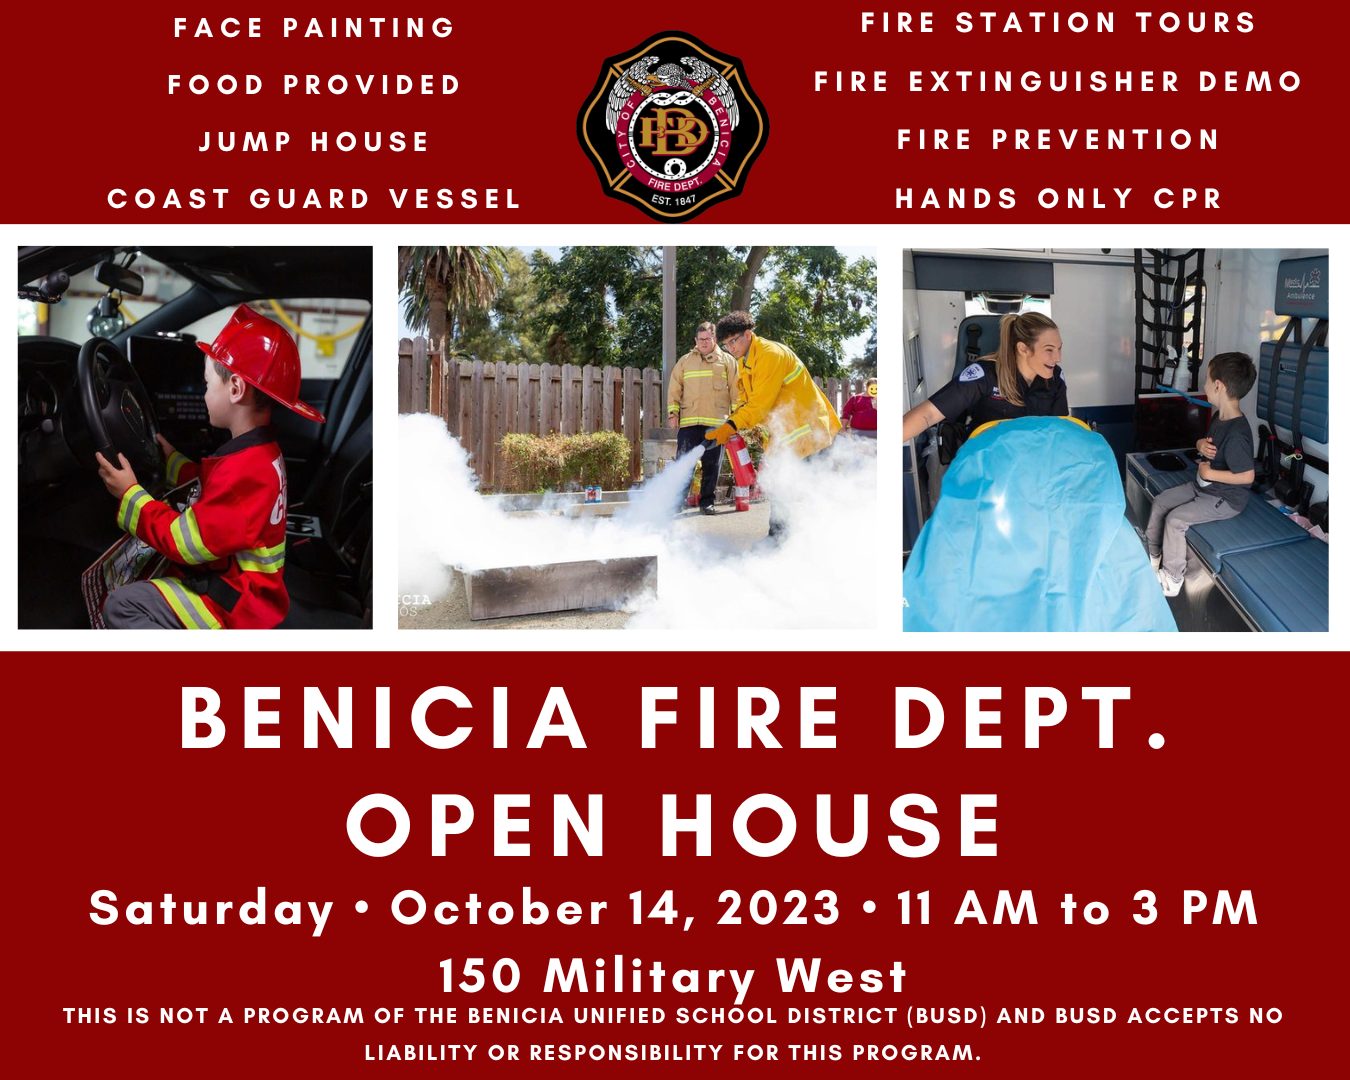 Benicia Fire Department Open House on October 14, 2023